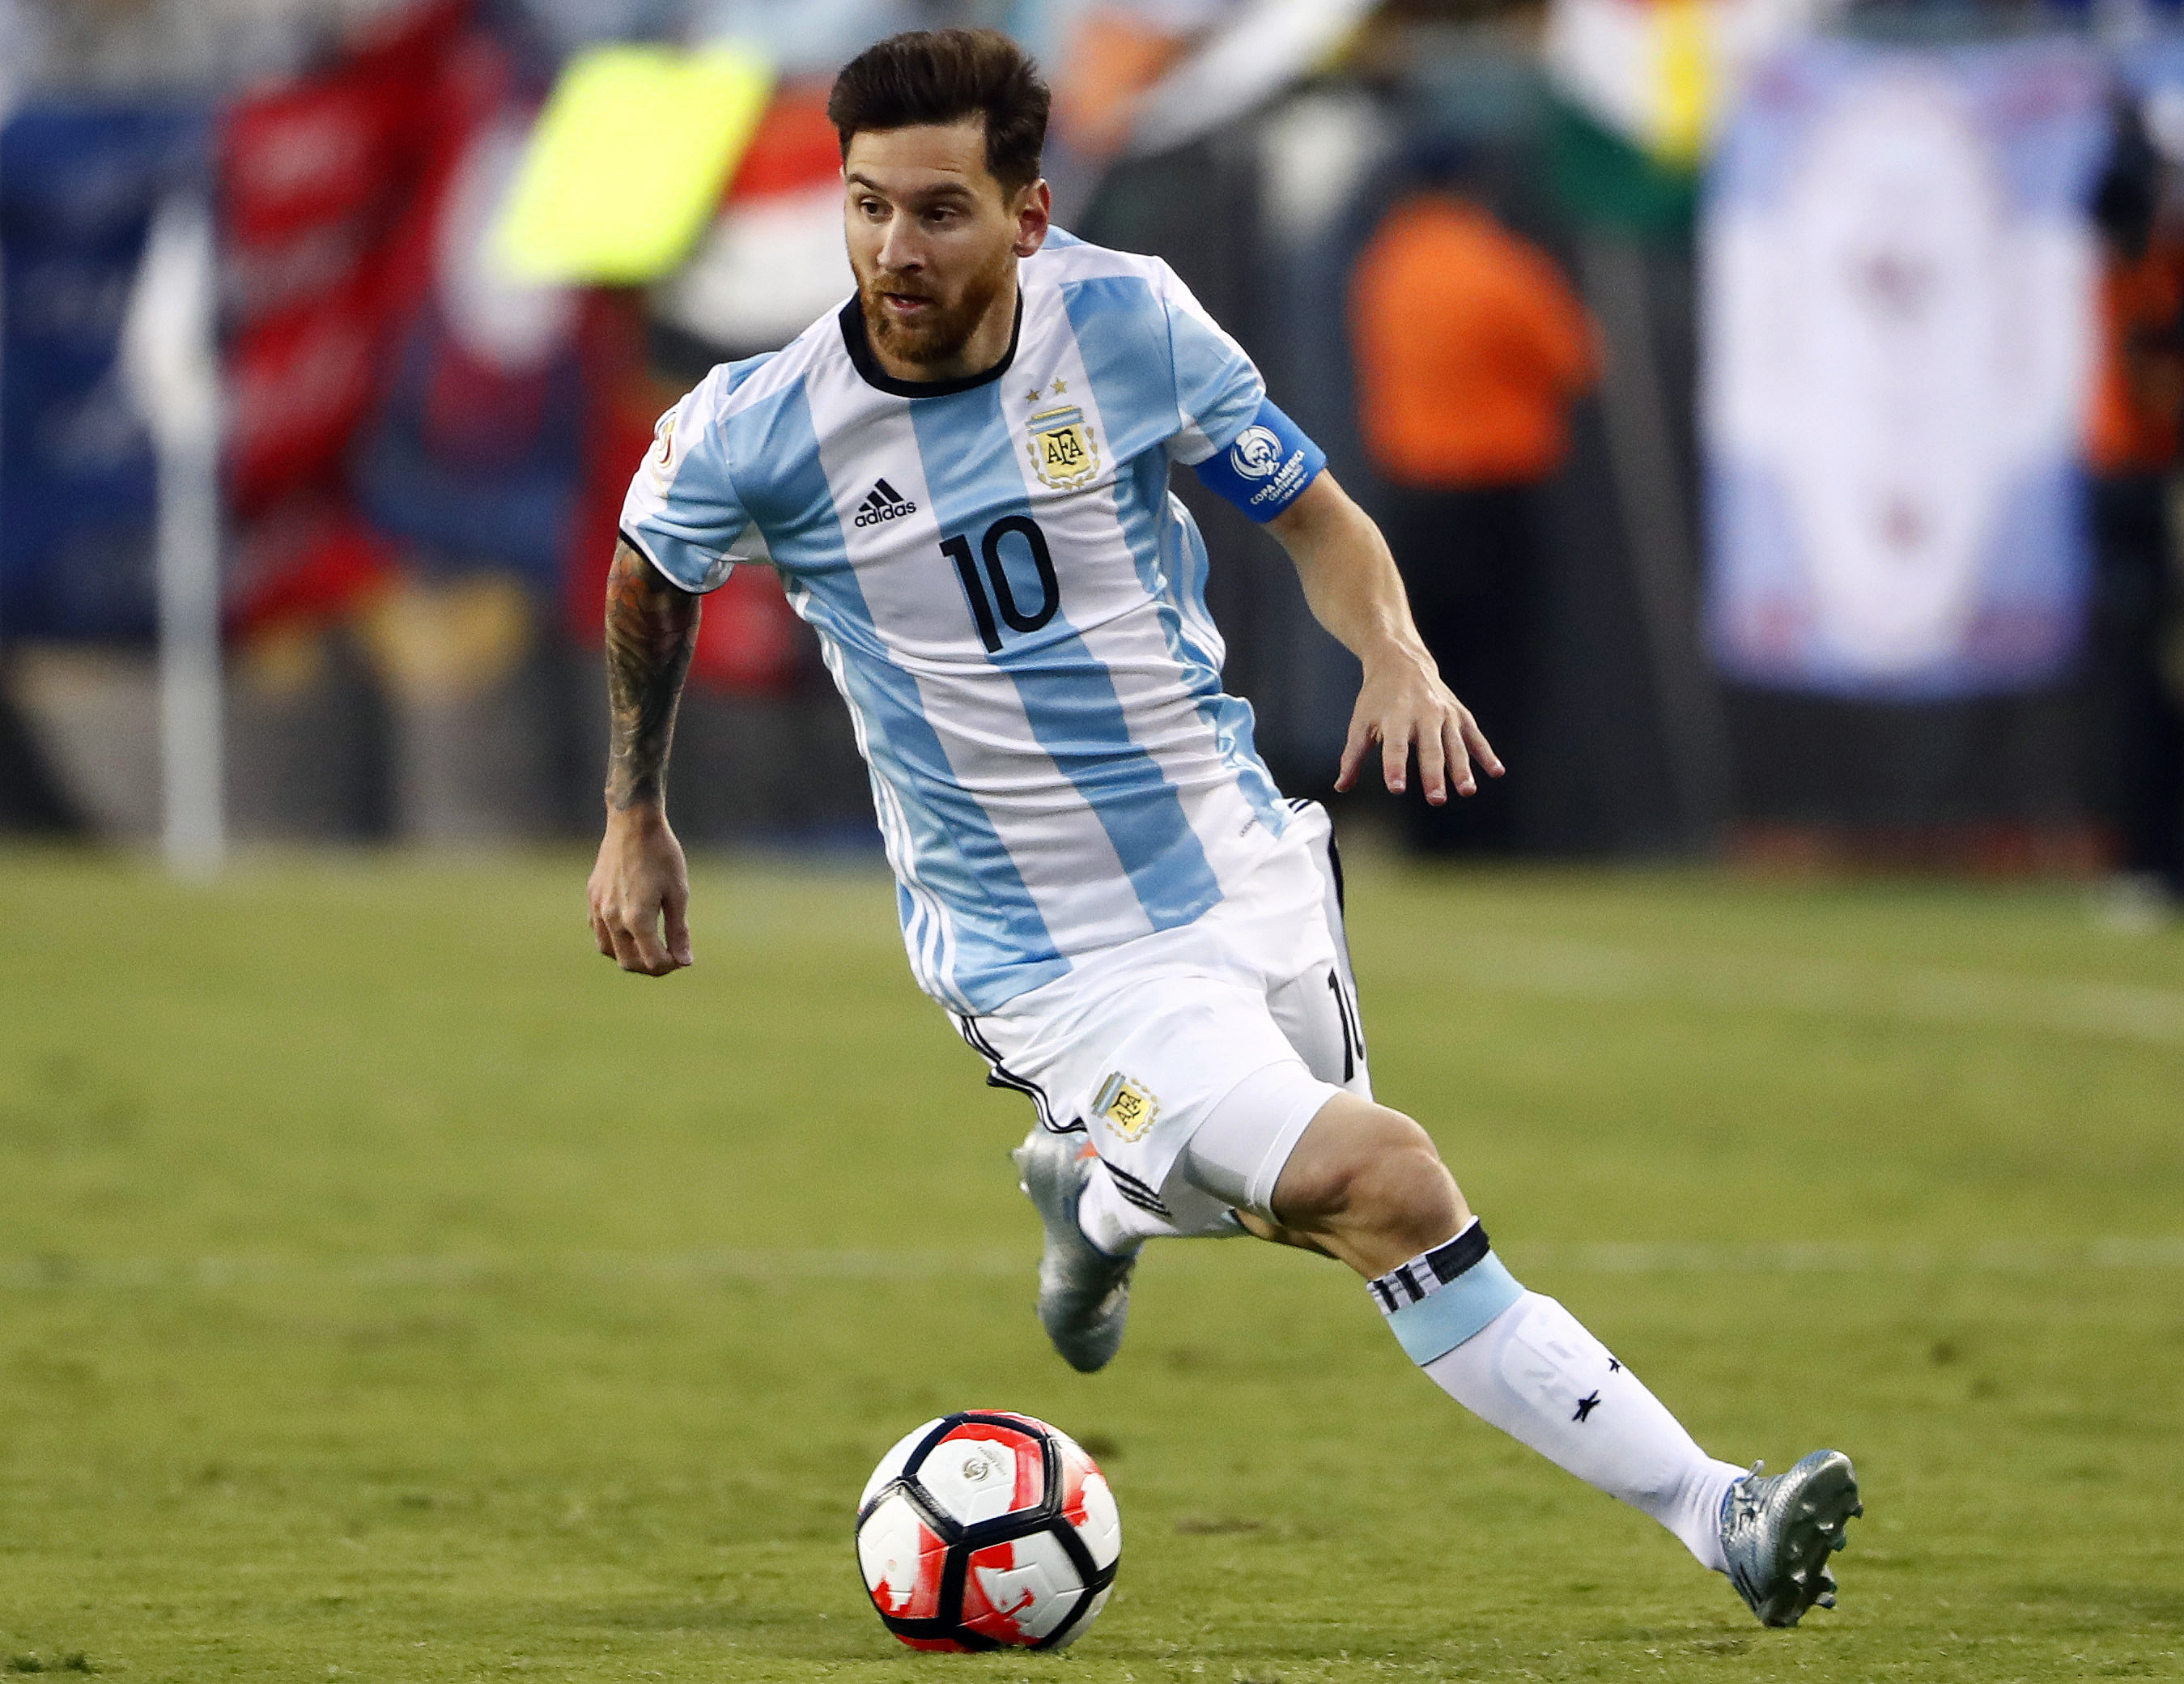 Argentina #39 s Lionel Messi the obstacle in front of USA #39 s Copa America